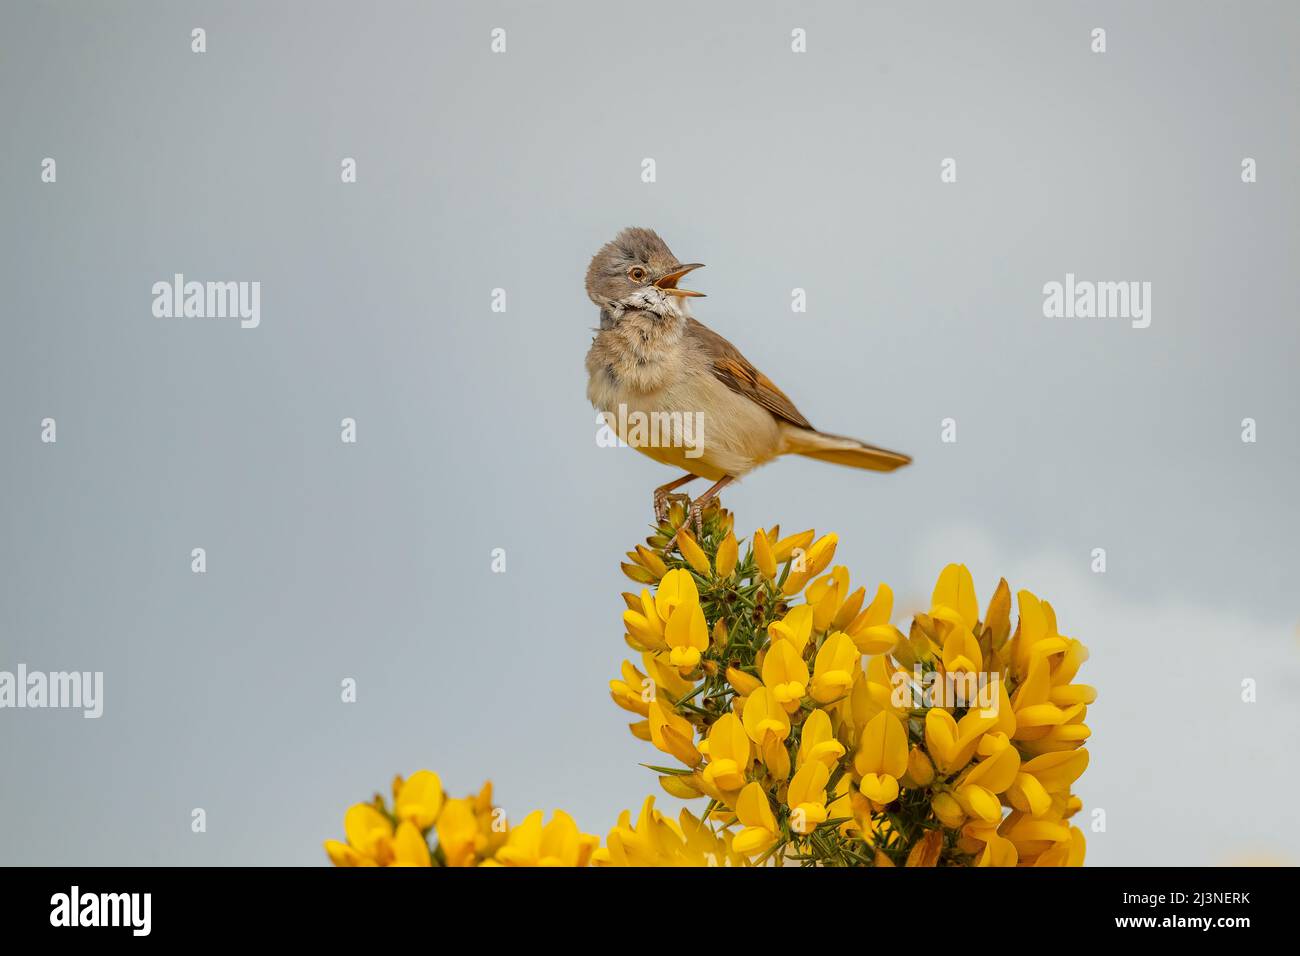 Whitethroat perched on a gorse plant singing, close up Stock Photo